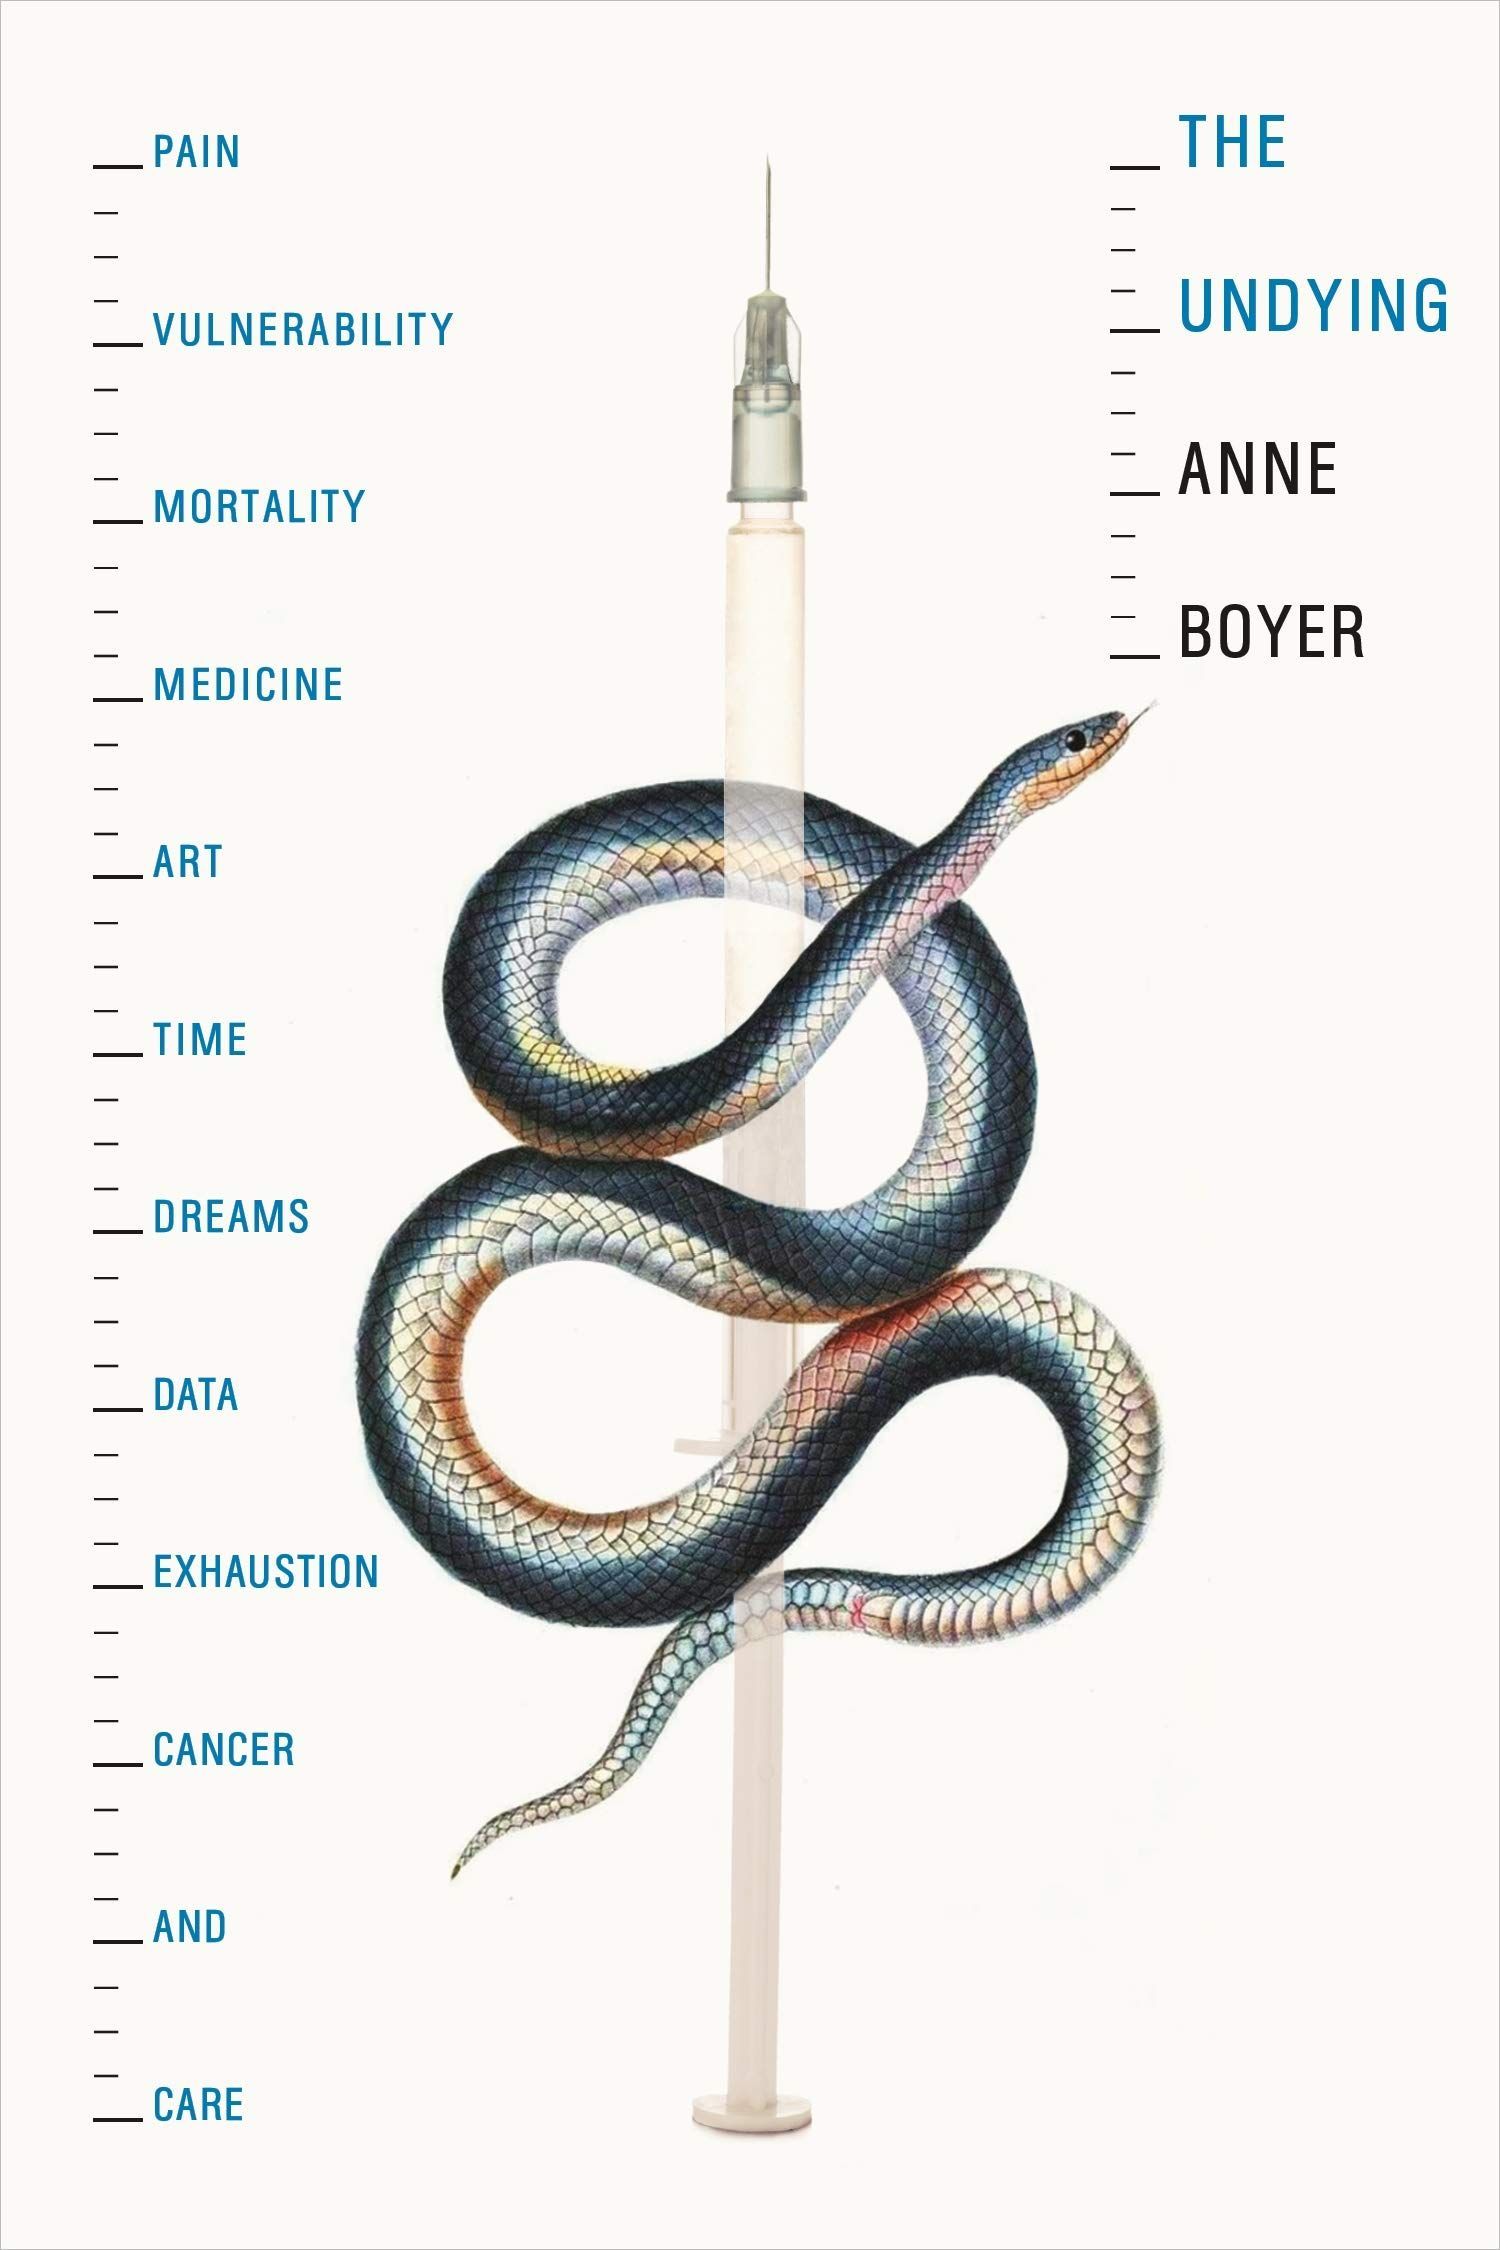 Pain as Revolution: On Anne Boyer’s “The Undying”